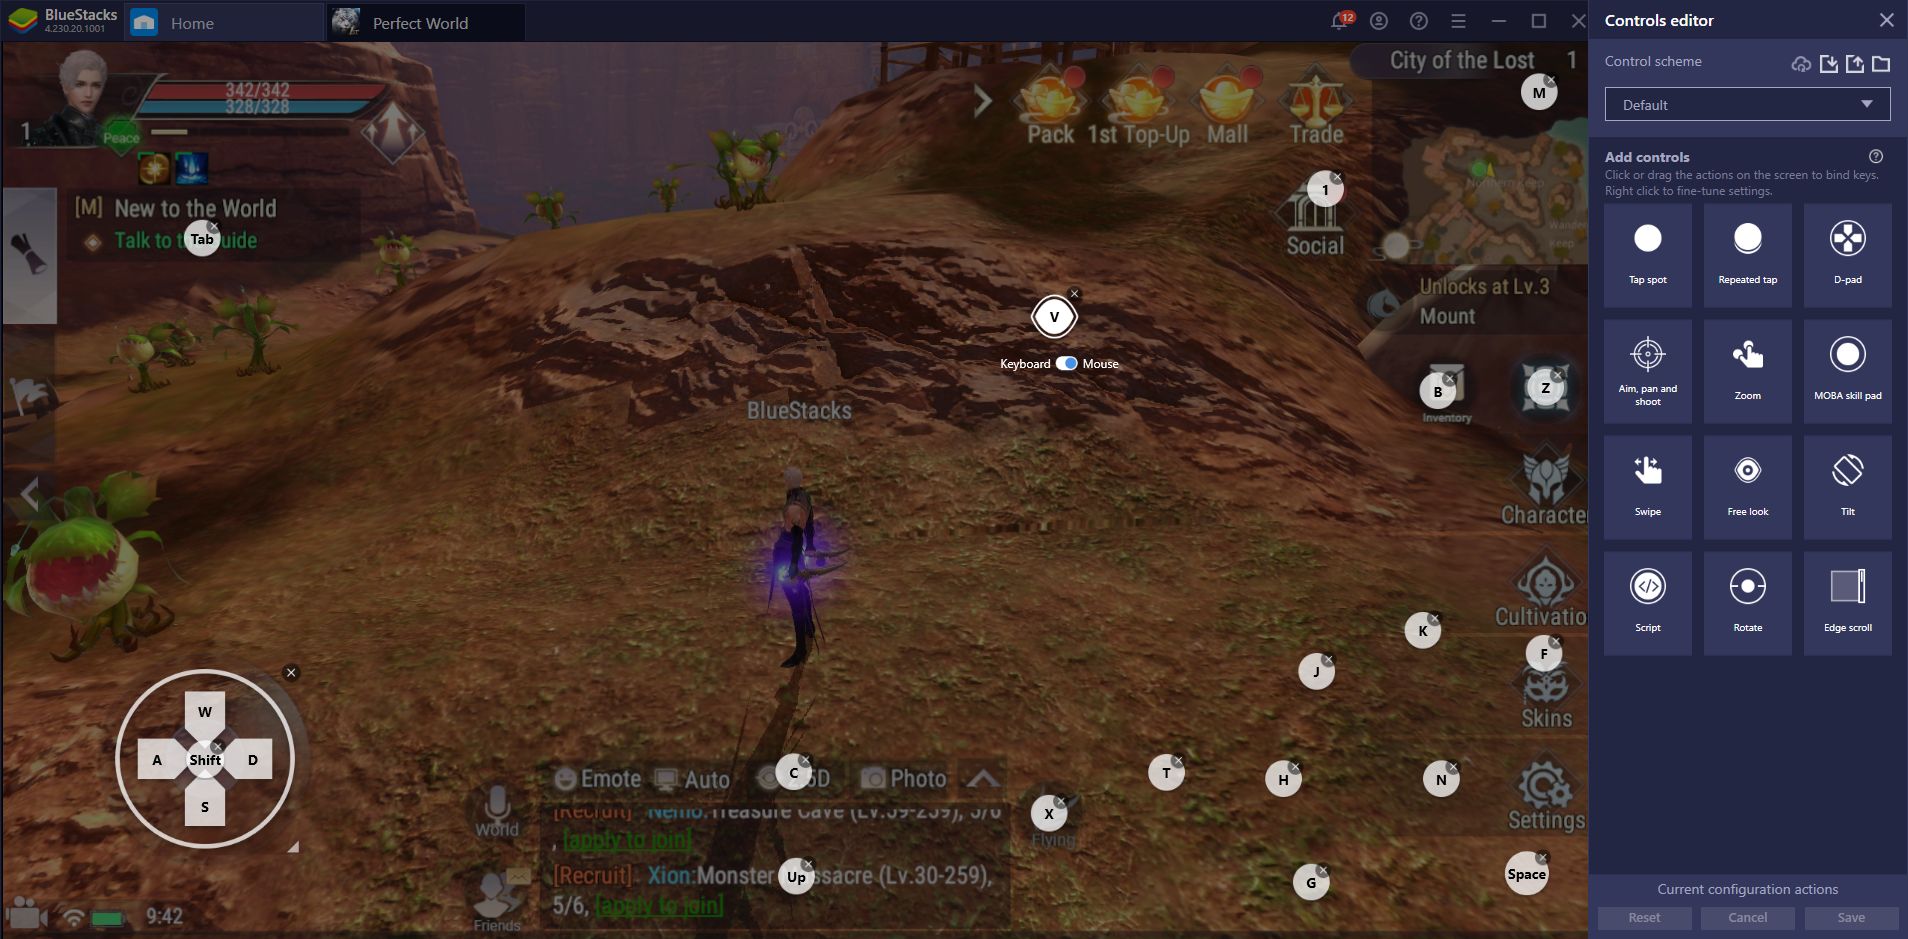 Perfect World Mobile - How to Enjoy the Popular Mobile MMORPG on PC With BlueStacks